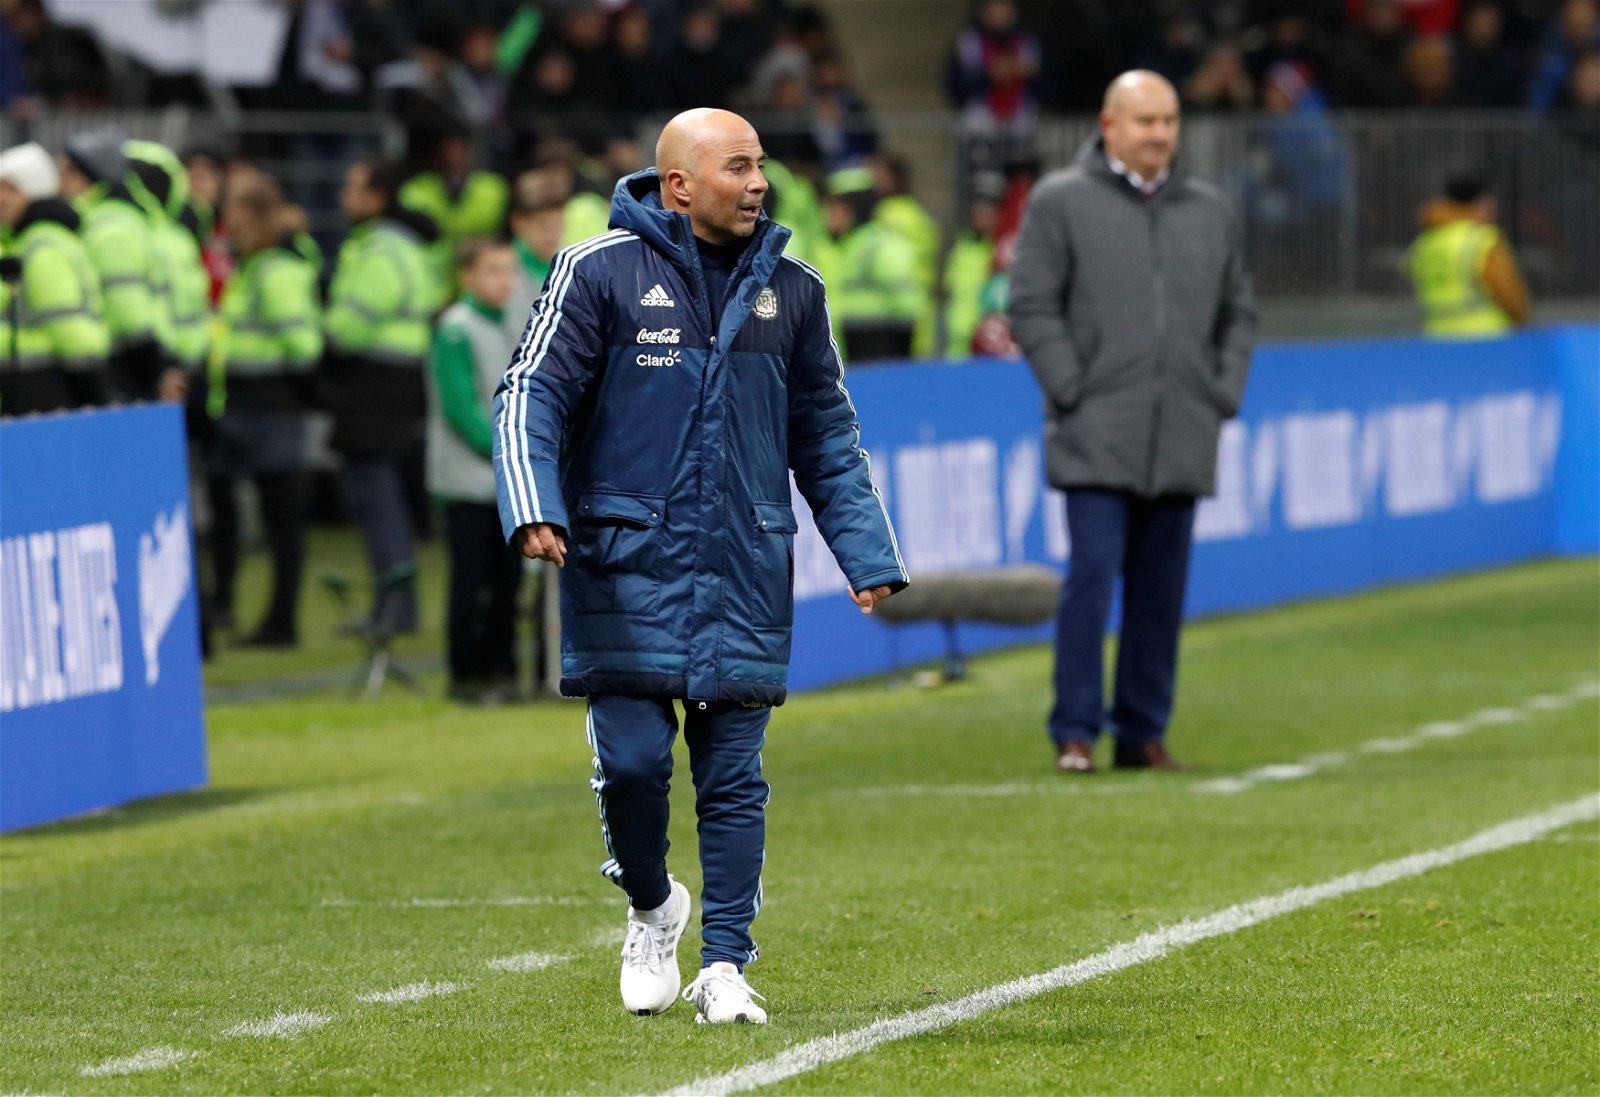 Argentina "mutually" agree to terminate Jorge Sampaoli's contract 1